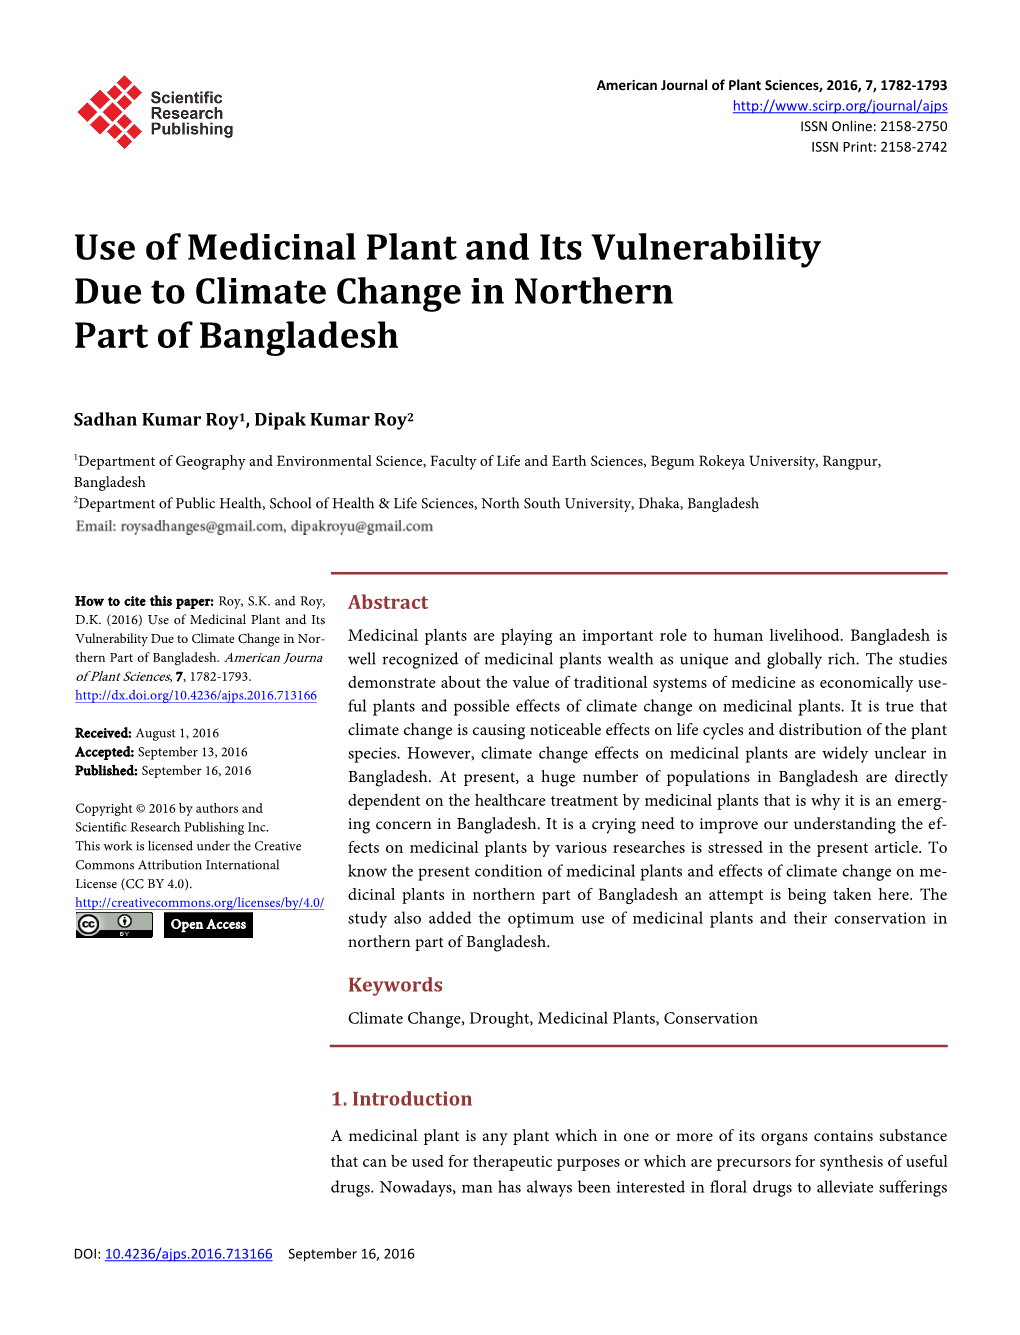 Use of Medicinal Plant and Its Vulnerability Due to Climate Change in Northern Part of Bangladesh